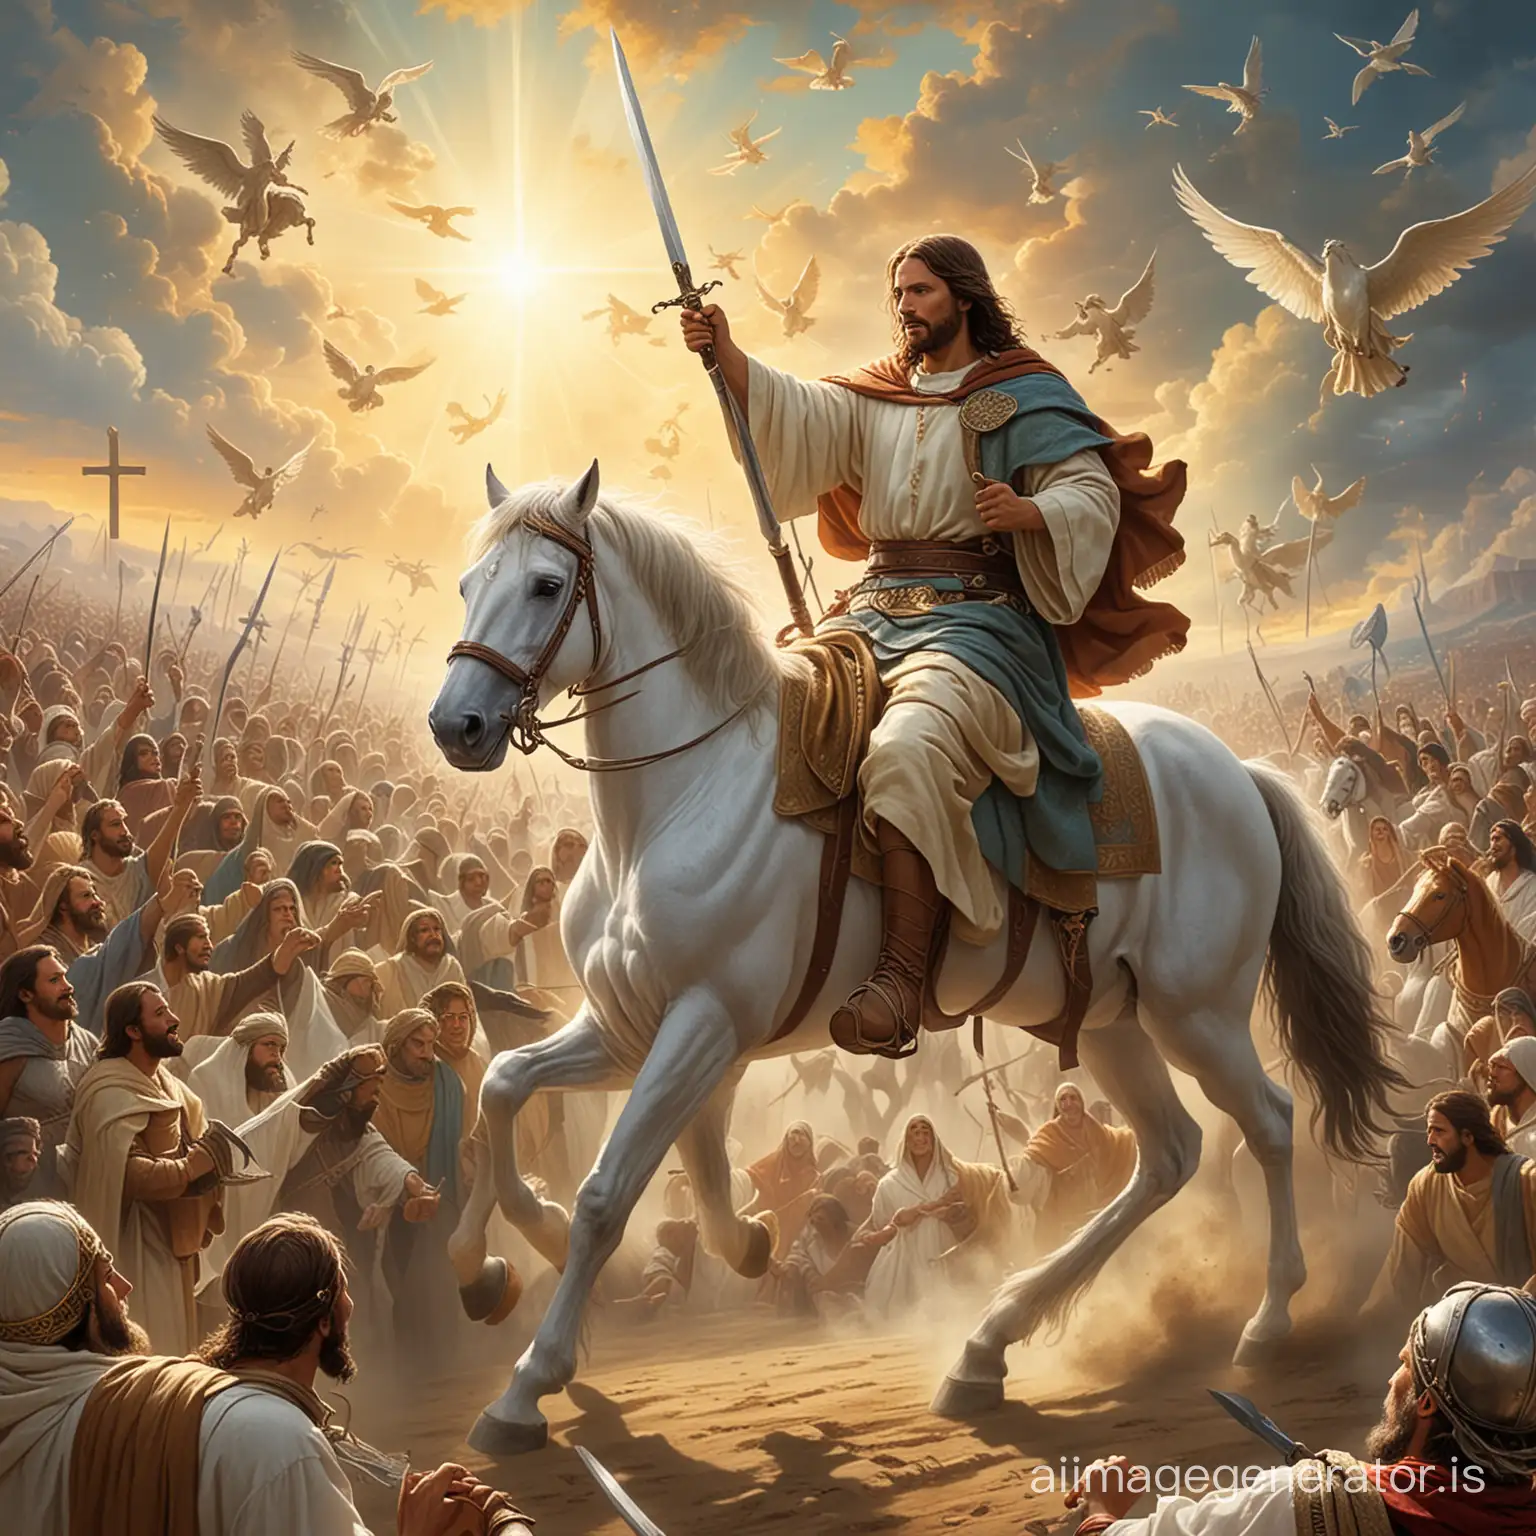 Jesus is riding on horse in heaven having sword in his right hand, also a crowd is with him on horses